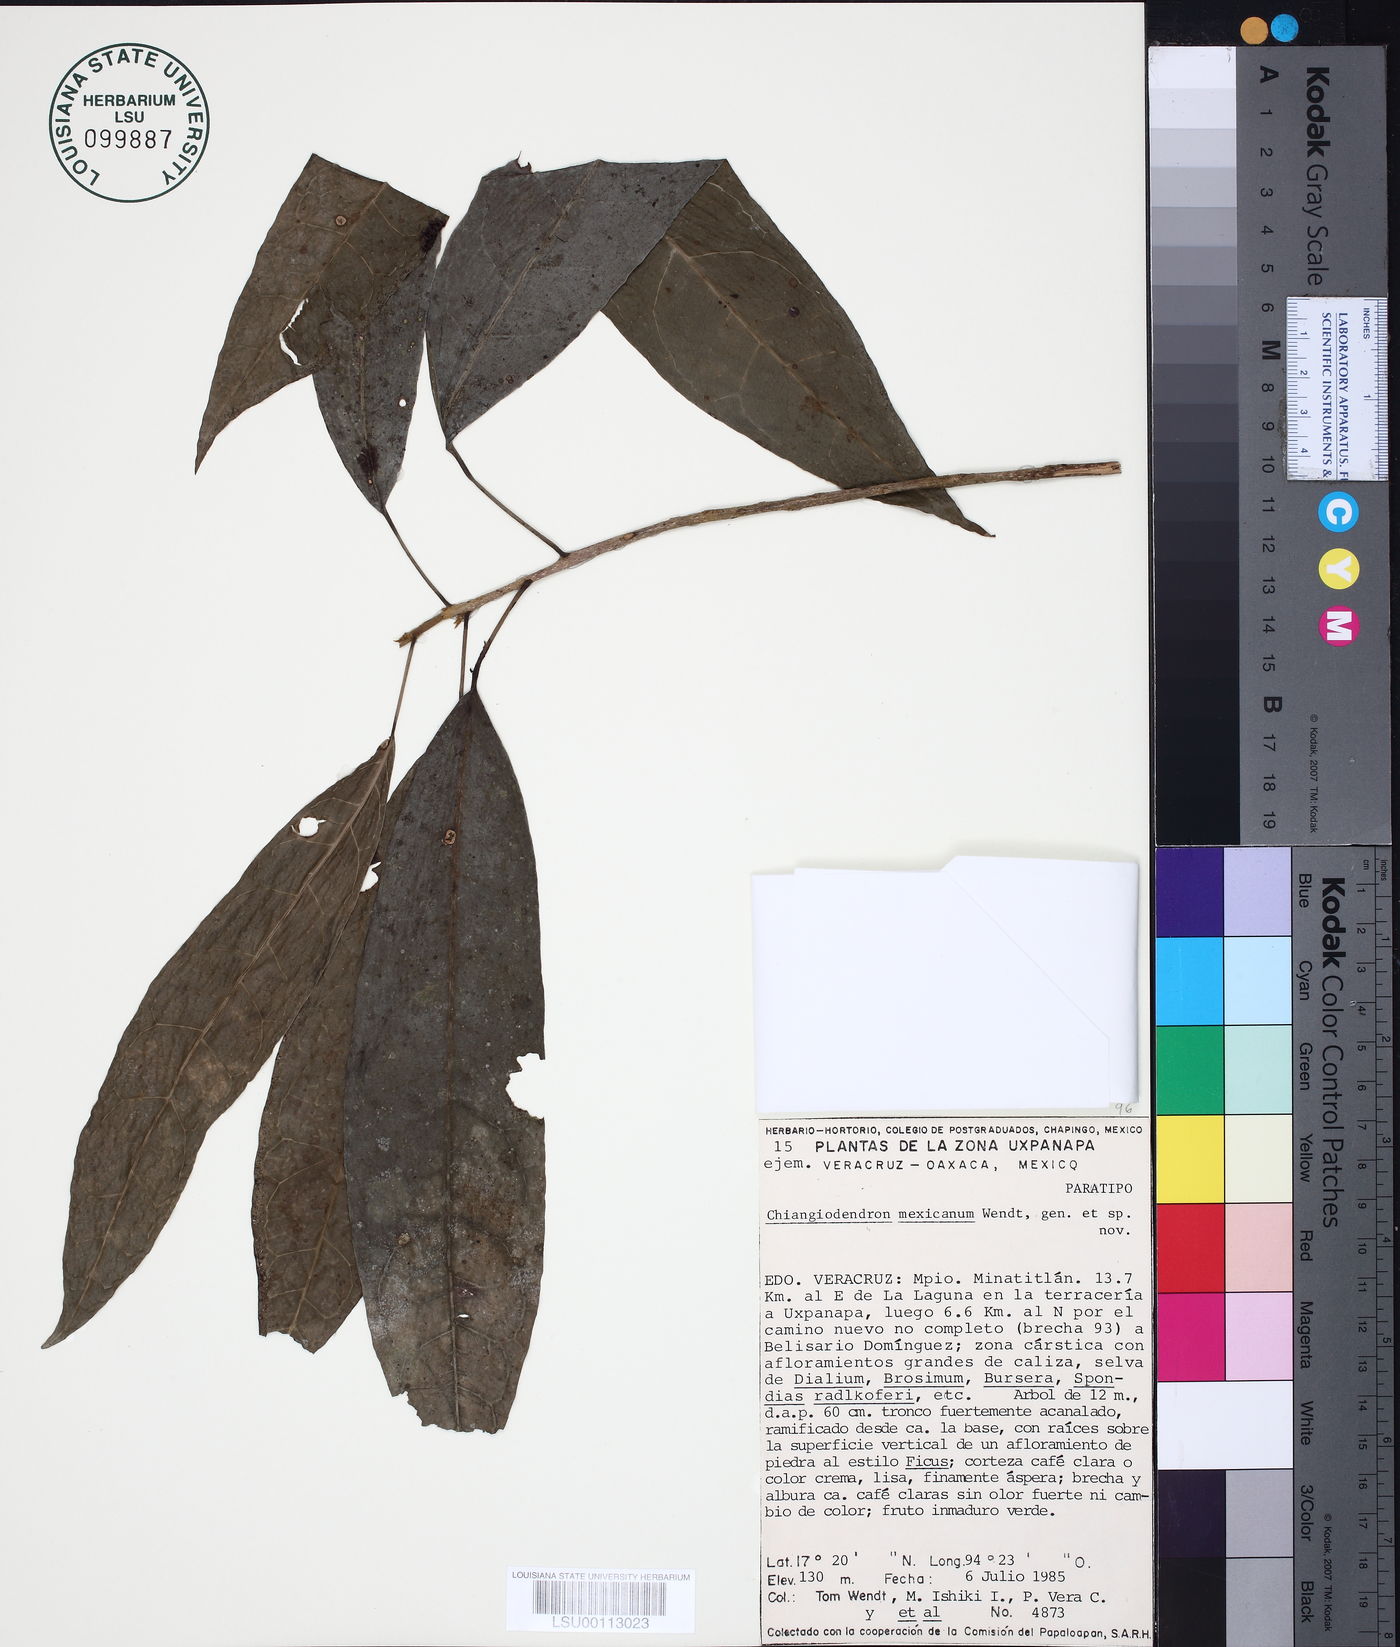 Chiangiodendron image